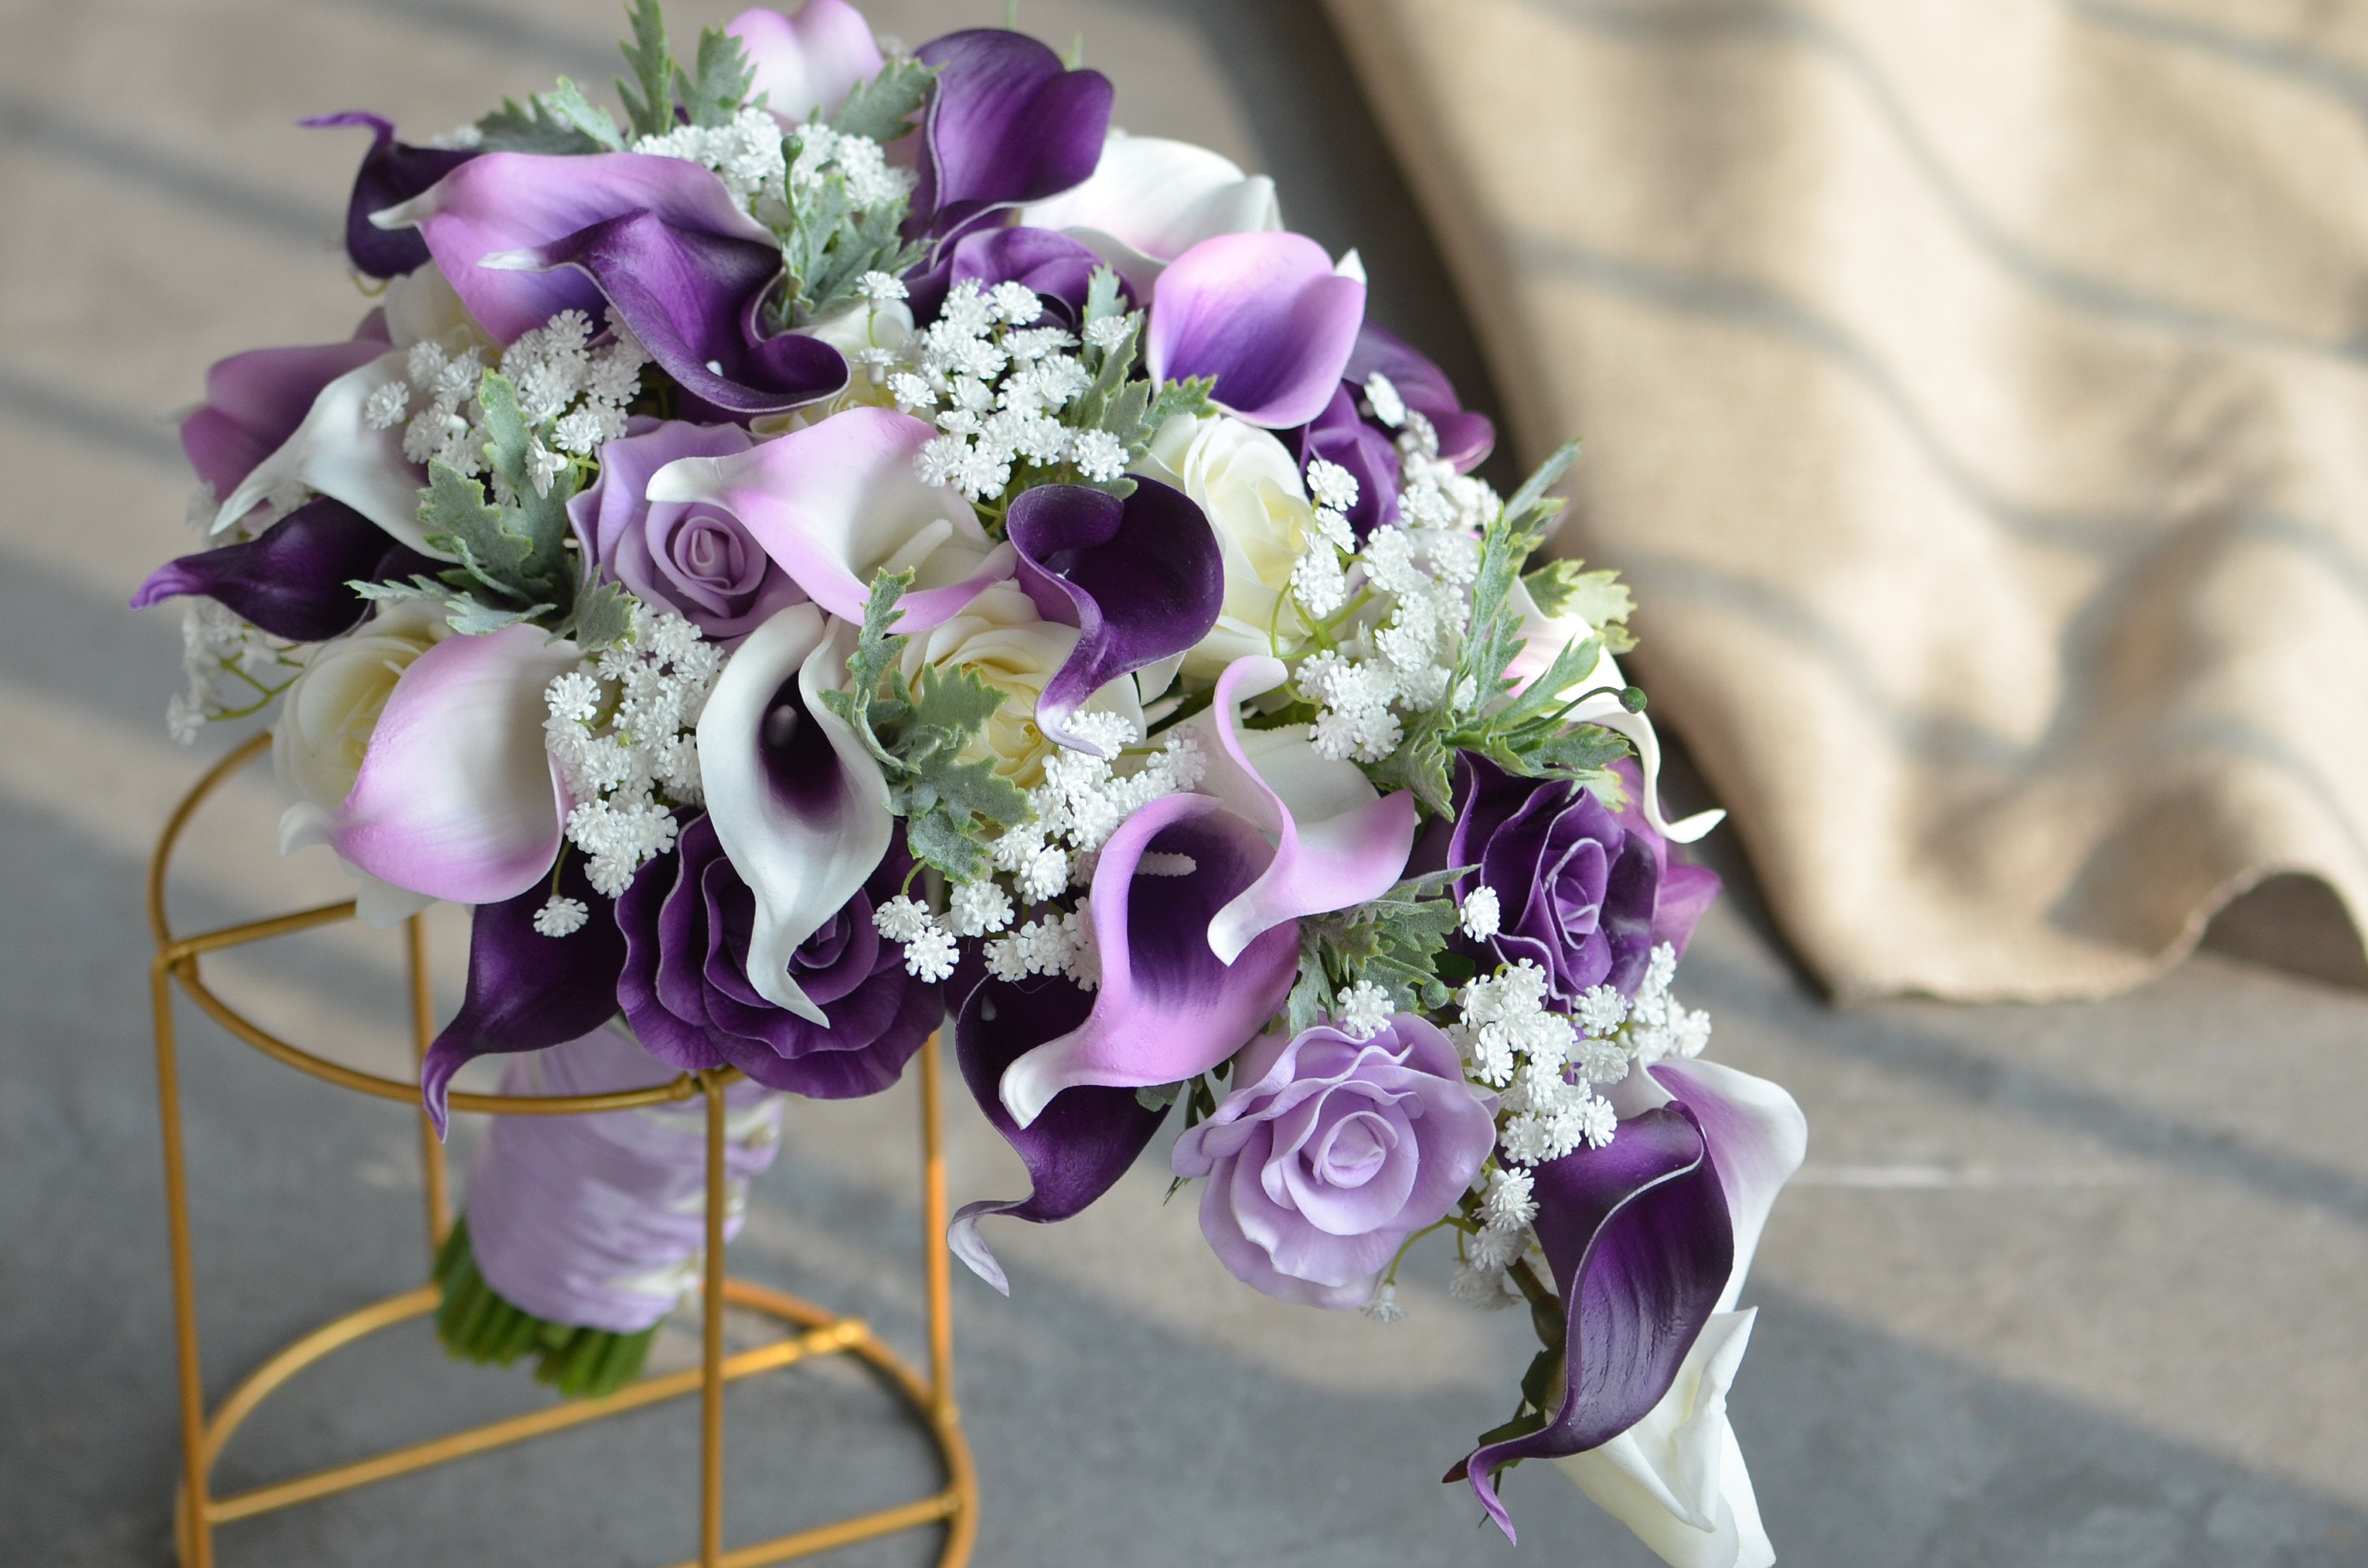 Fake Purple Bridal Bouquets, Breath Lilies, - Silk Real Bouquet, Touch Bridesmaids Rustic Bouquets, Etsy Roses, Bridal Ivory Sweden Calla White Baby\'s